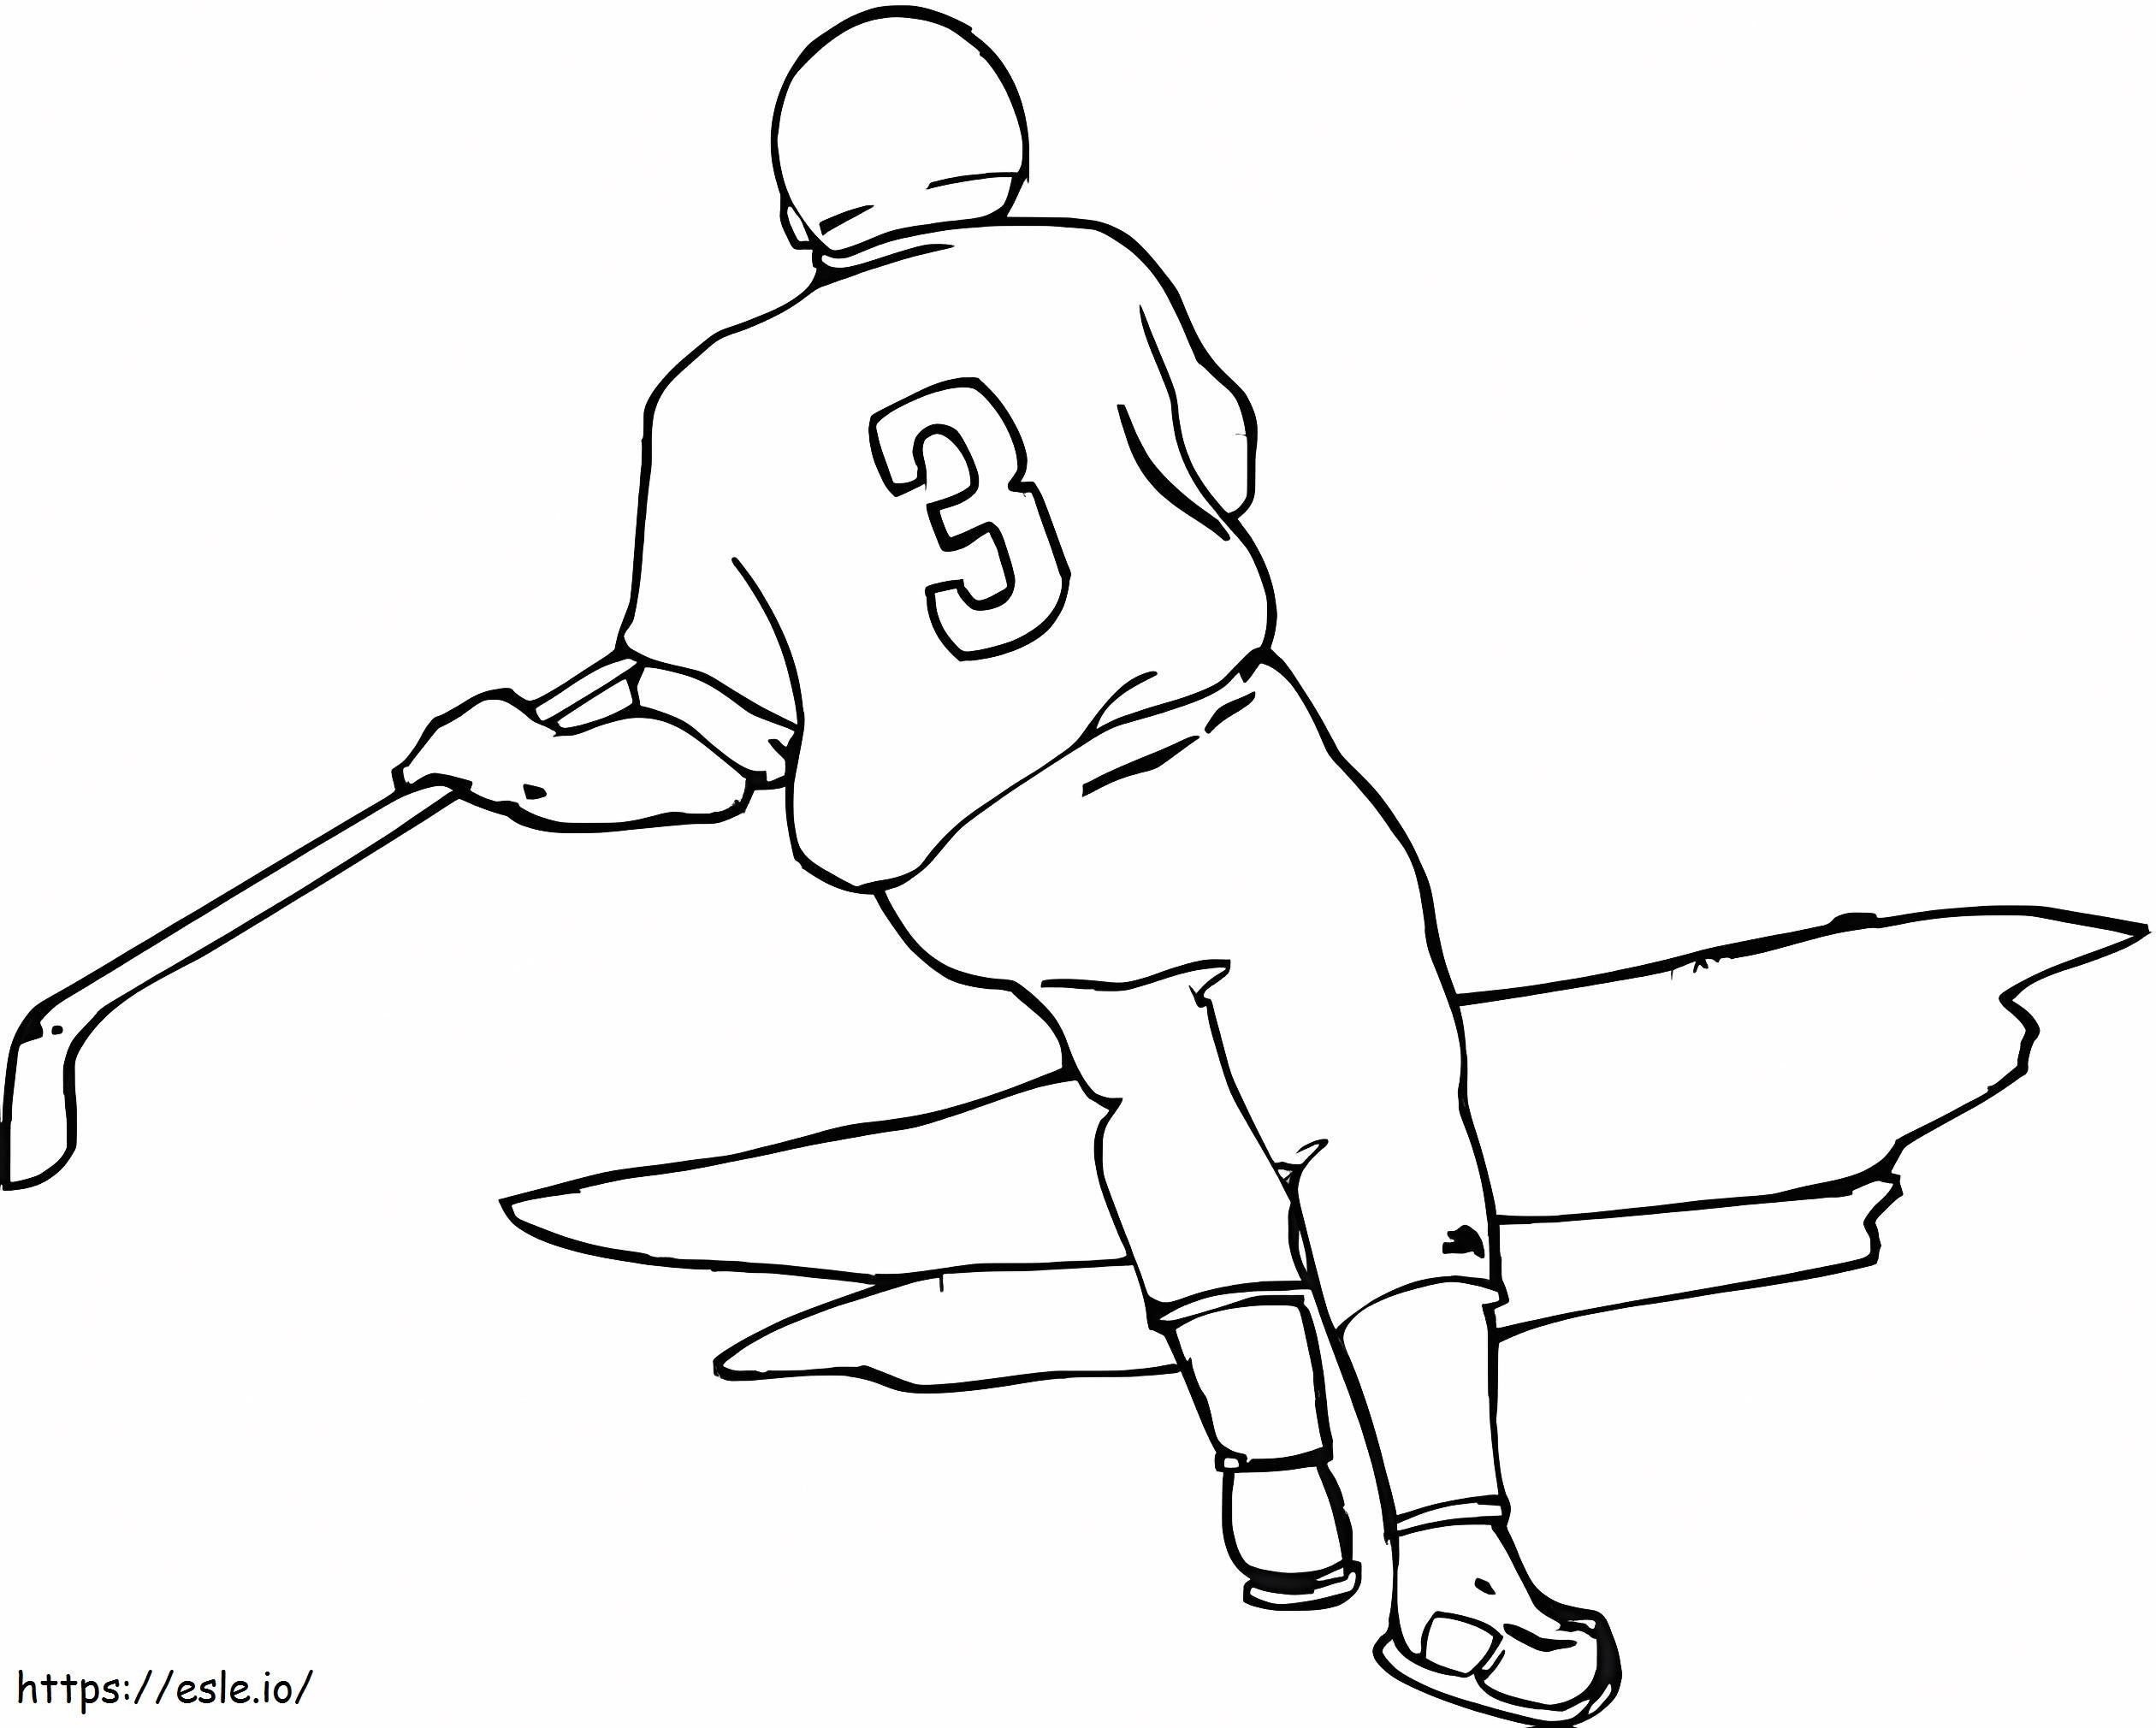 Good Hockey Players coloring page